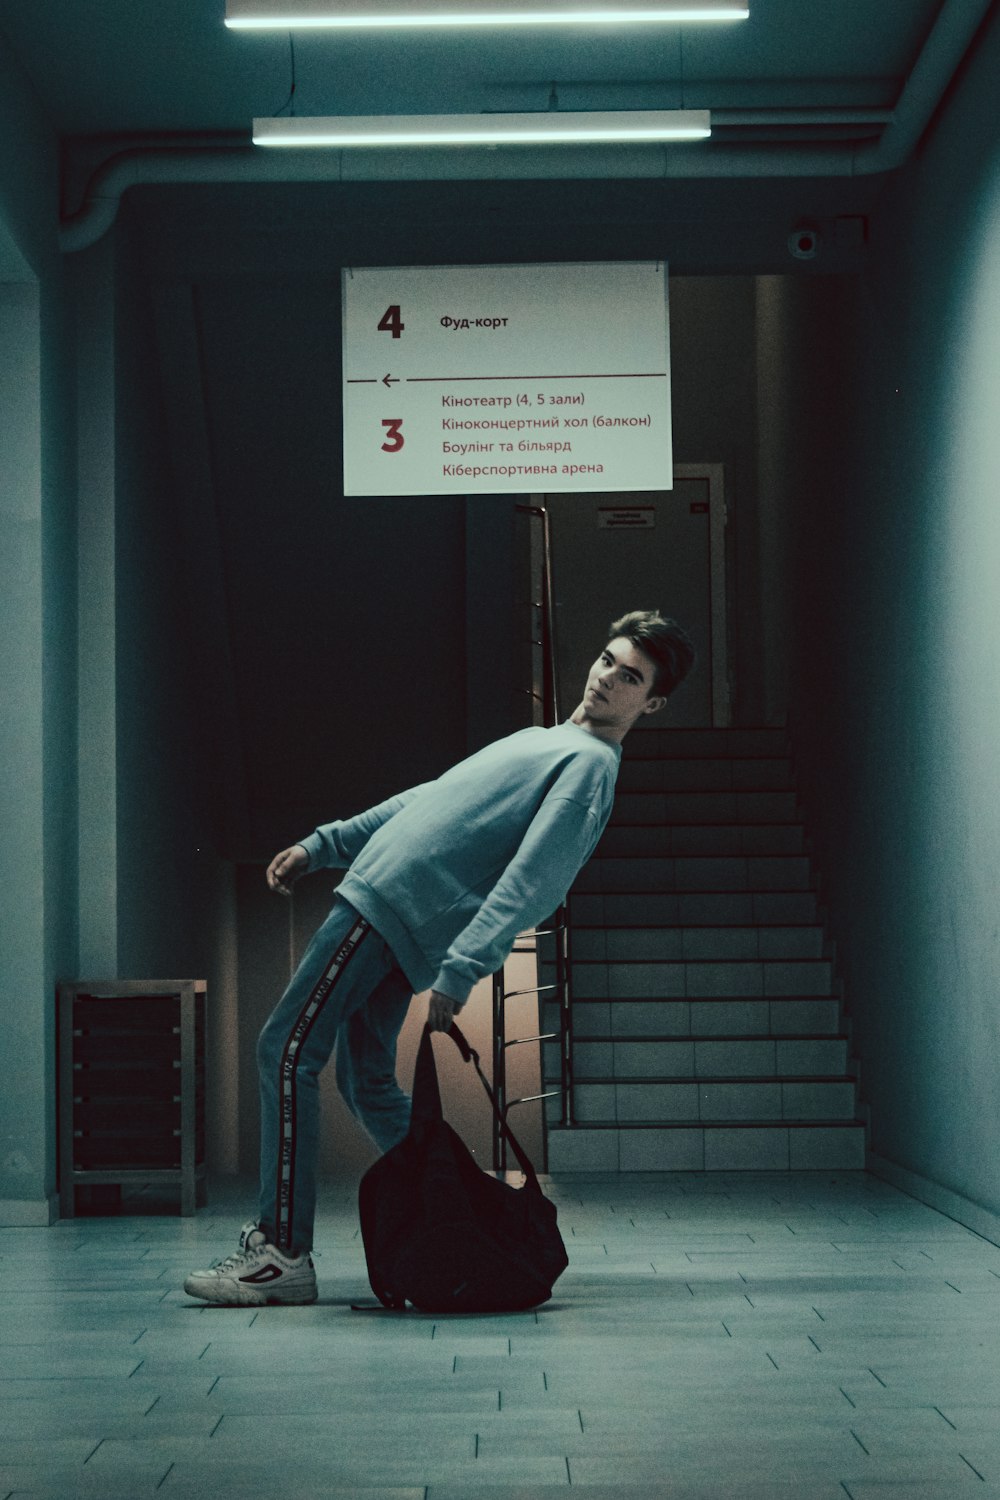 a man leaning on a suitcase in a hallway